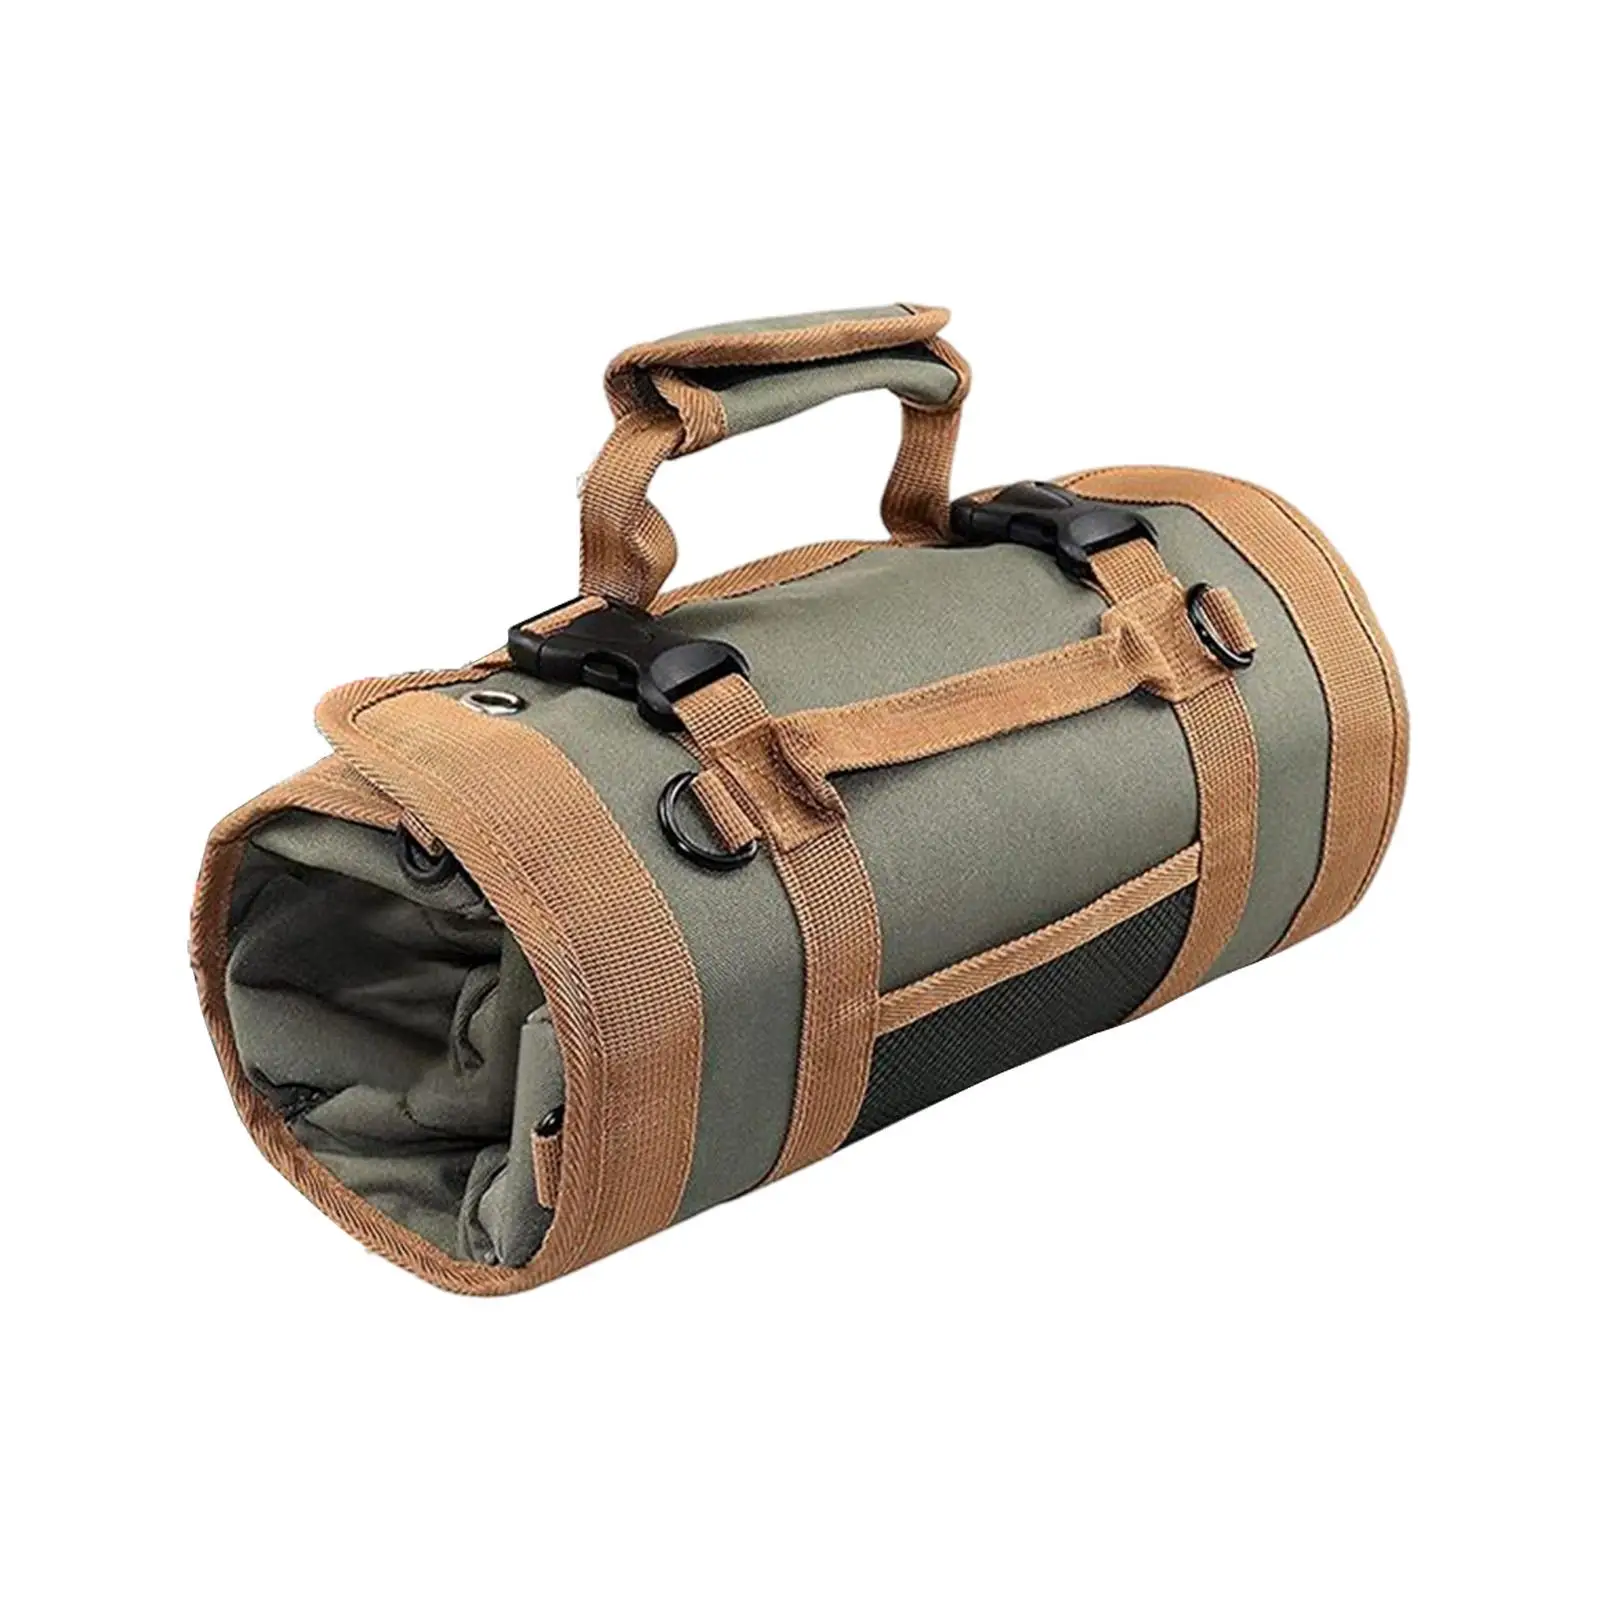 Tool Bag Rolling with Zipper Storage Carry Case for Hiking Outdoor Dad Gifts